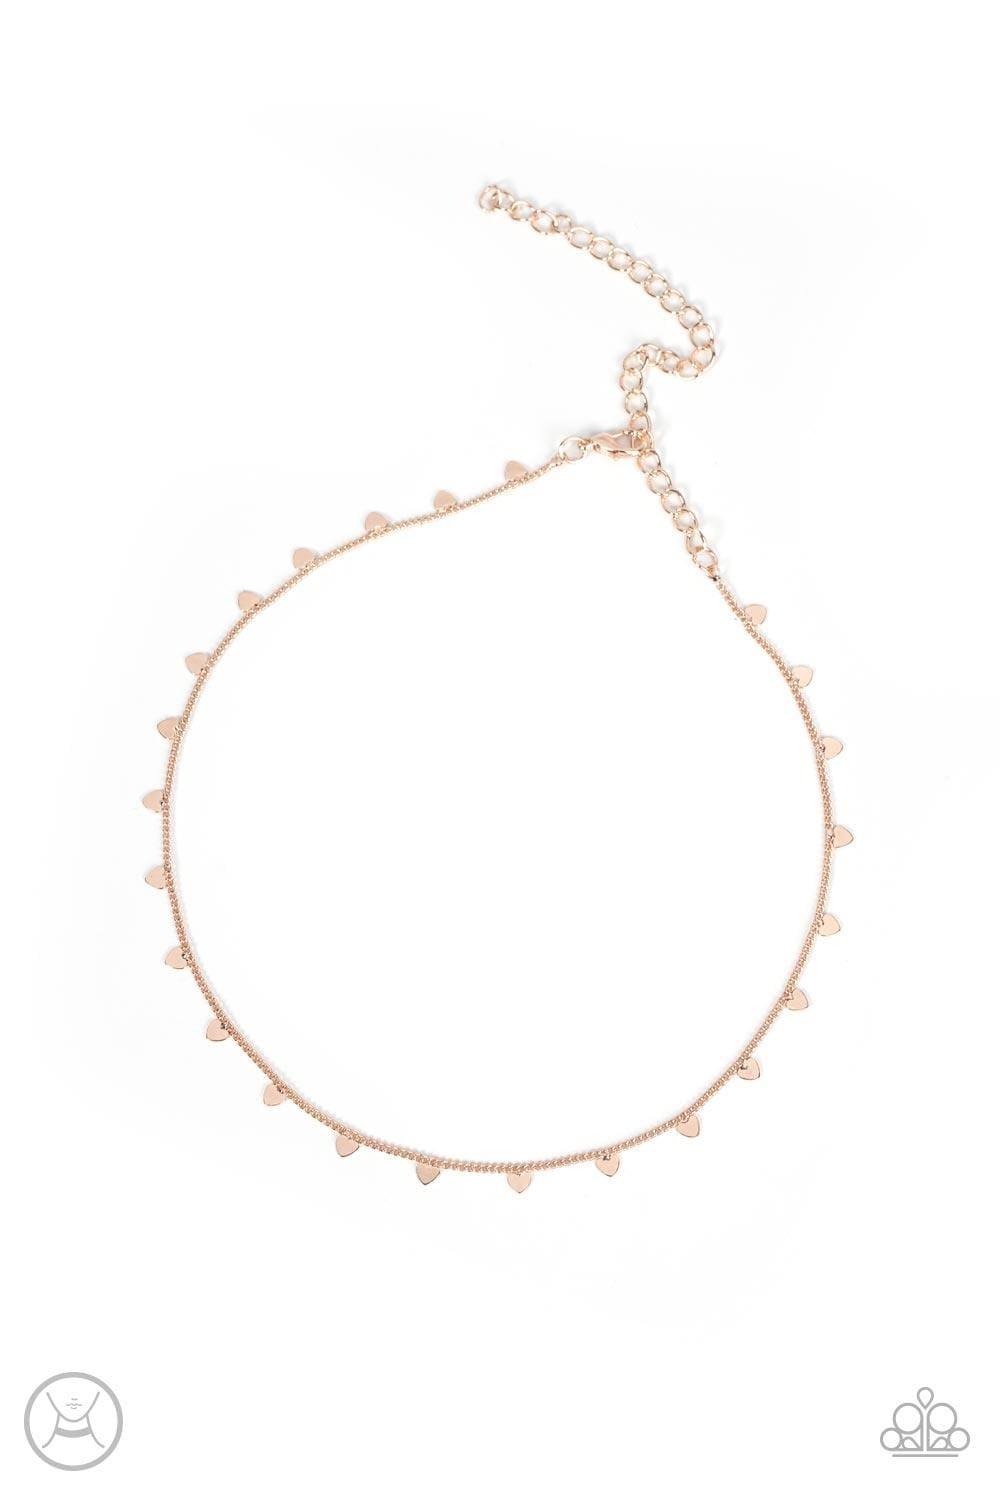 Paparazzi Accessories - Cupids Cutest Valentine - Rose Gold Choker Necklace - Bling by JessieK